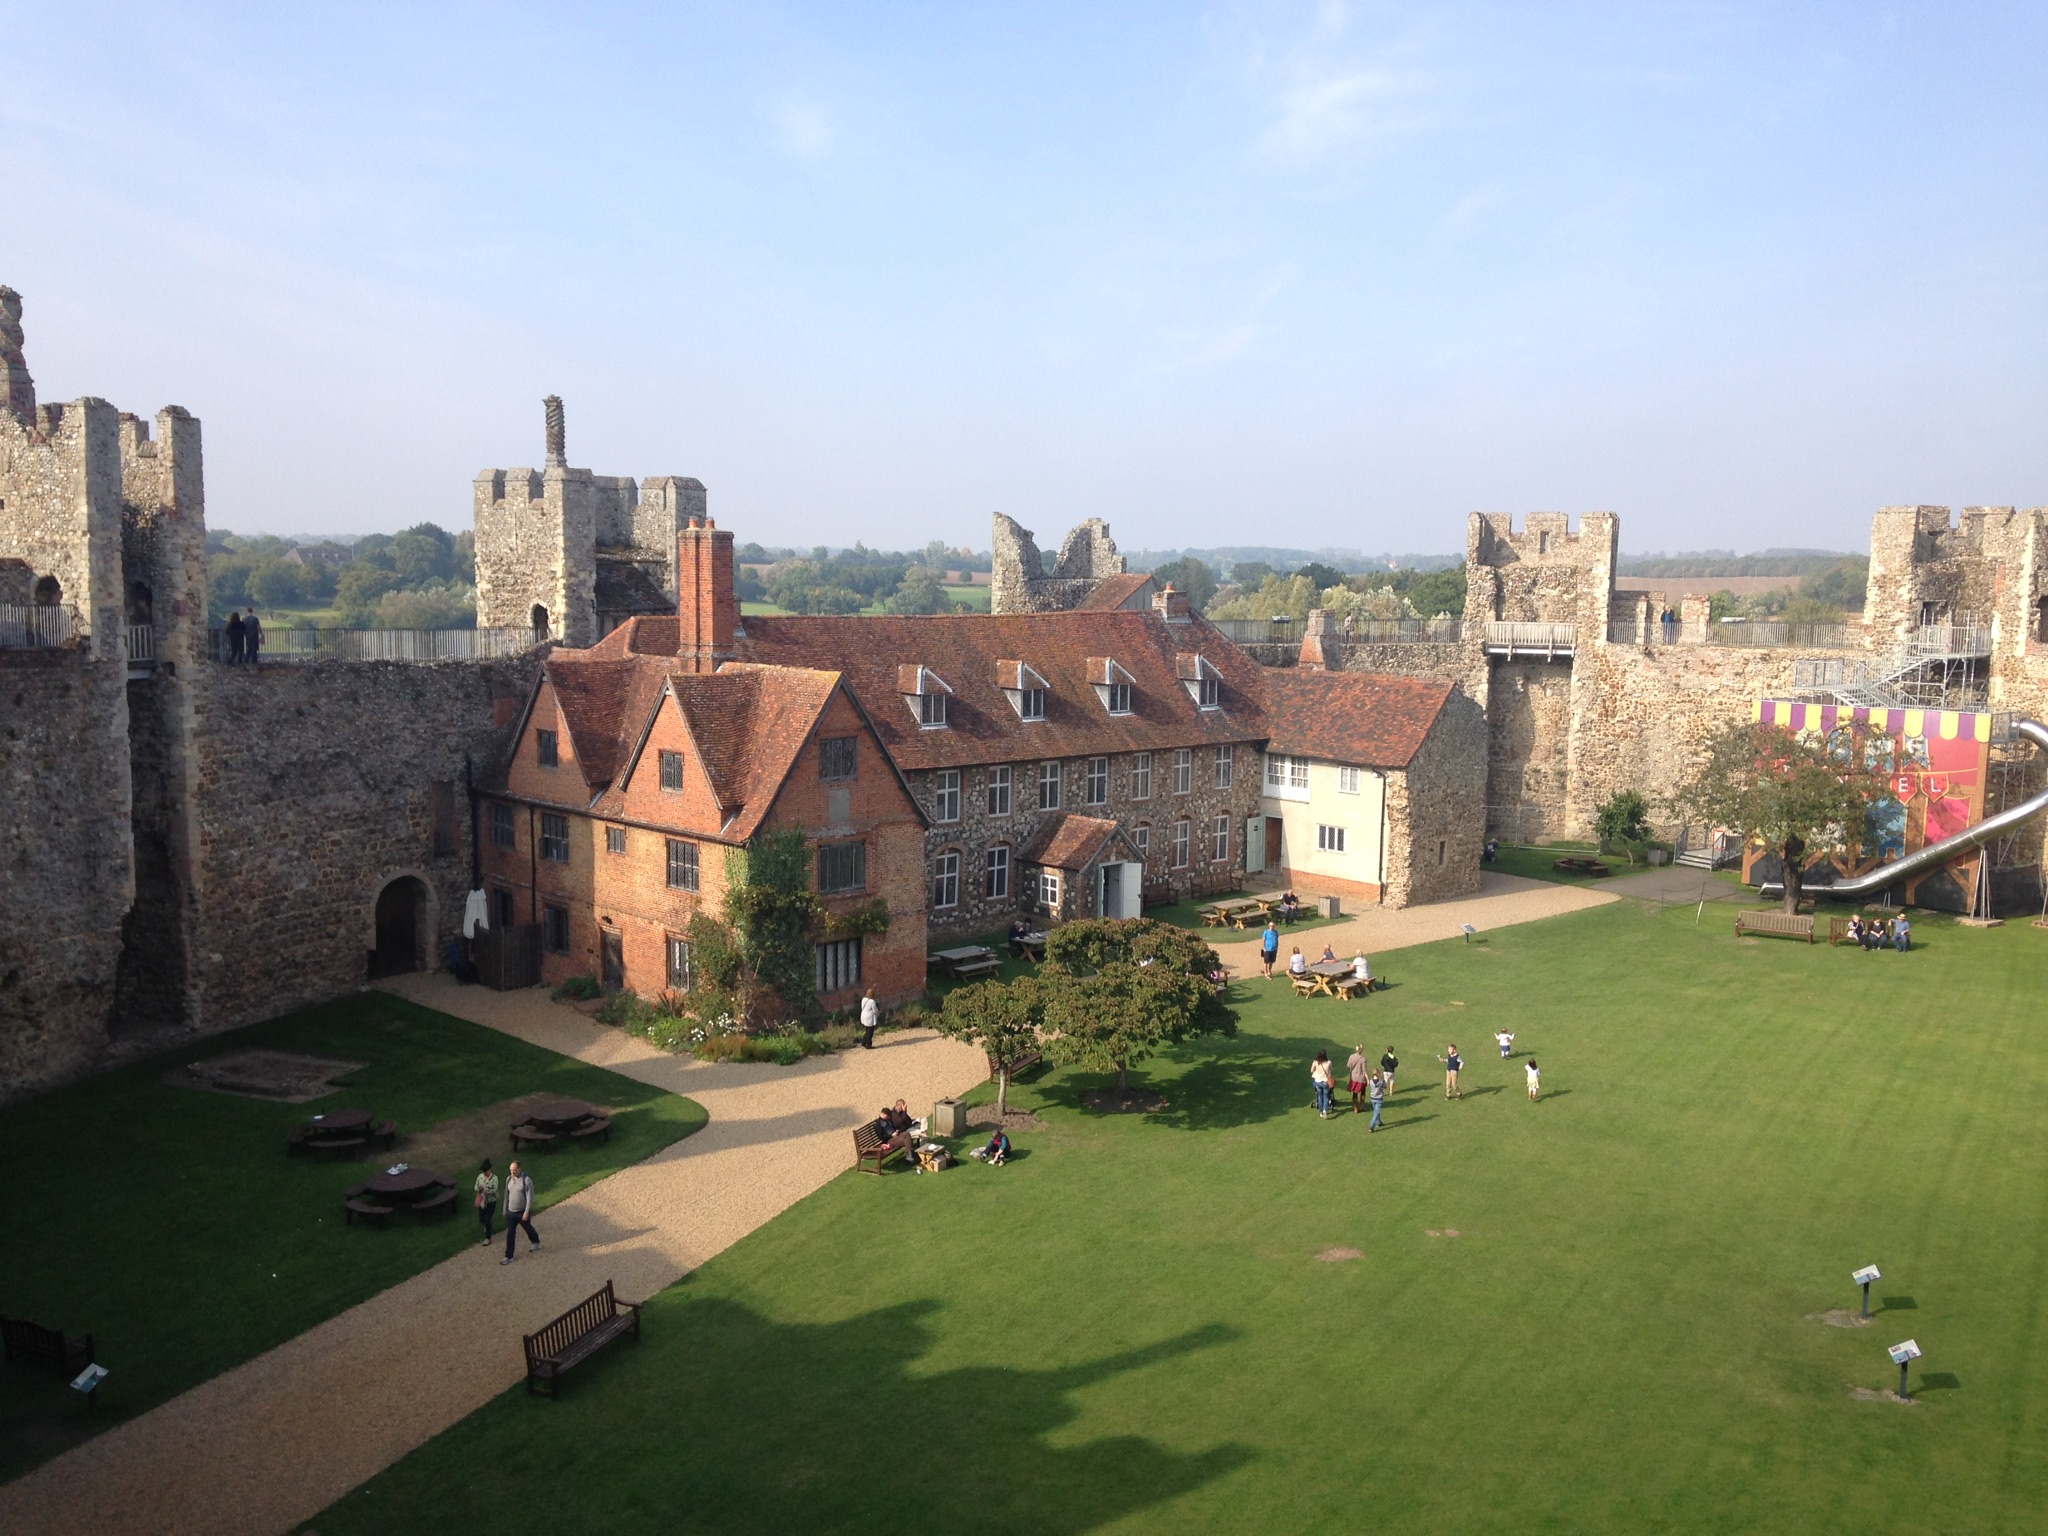 Framlingham Castle with members of the public including children playing in sunshine on lawns in the foreground